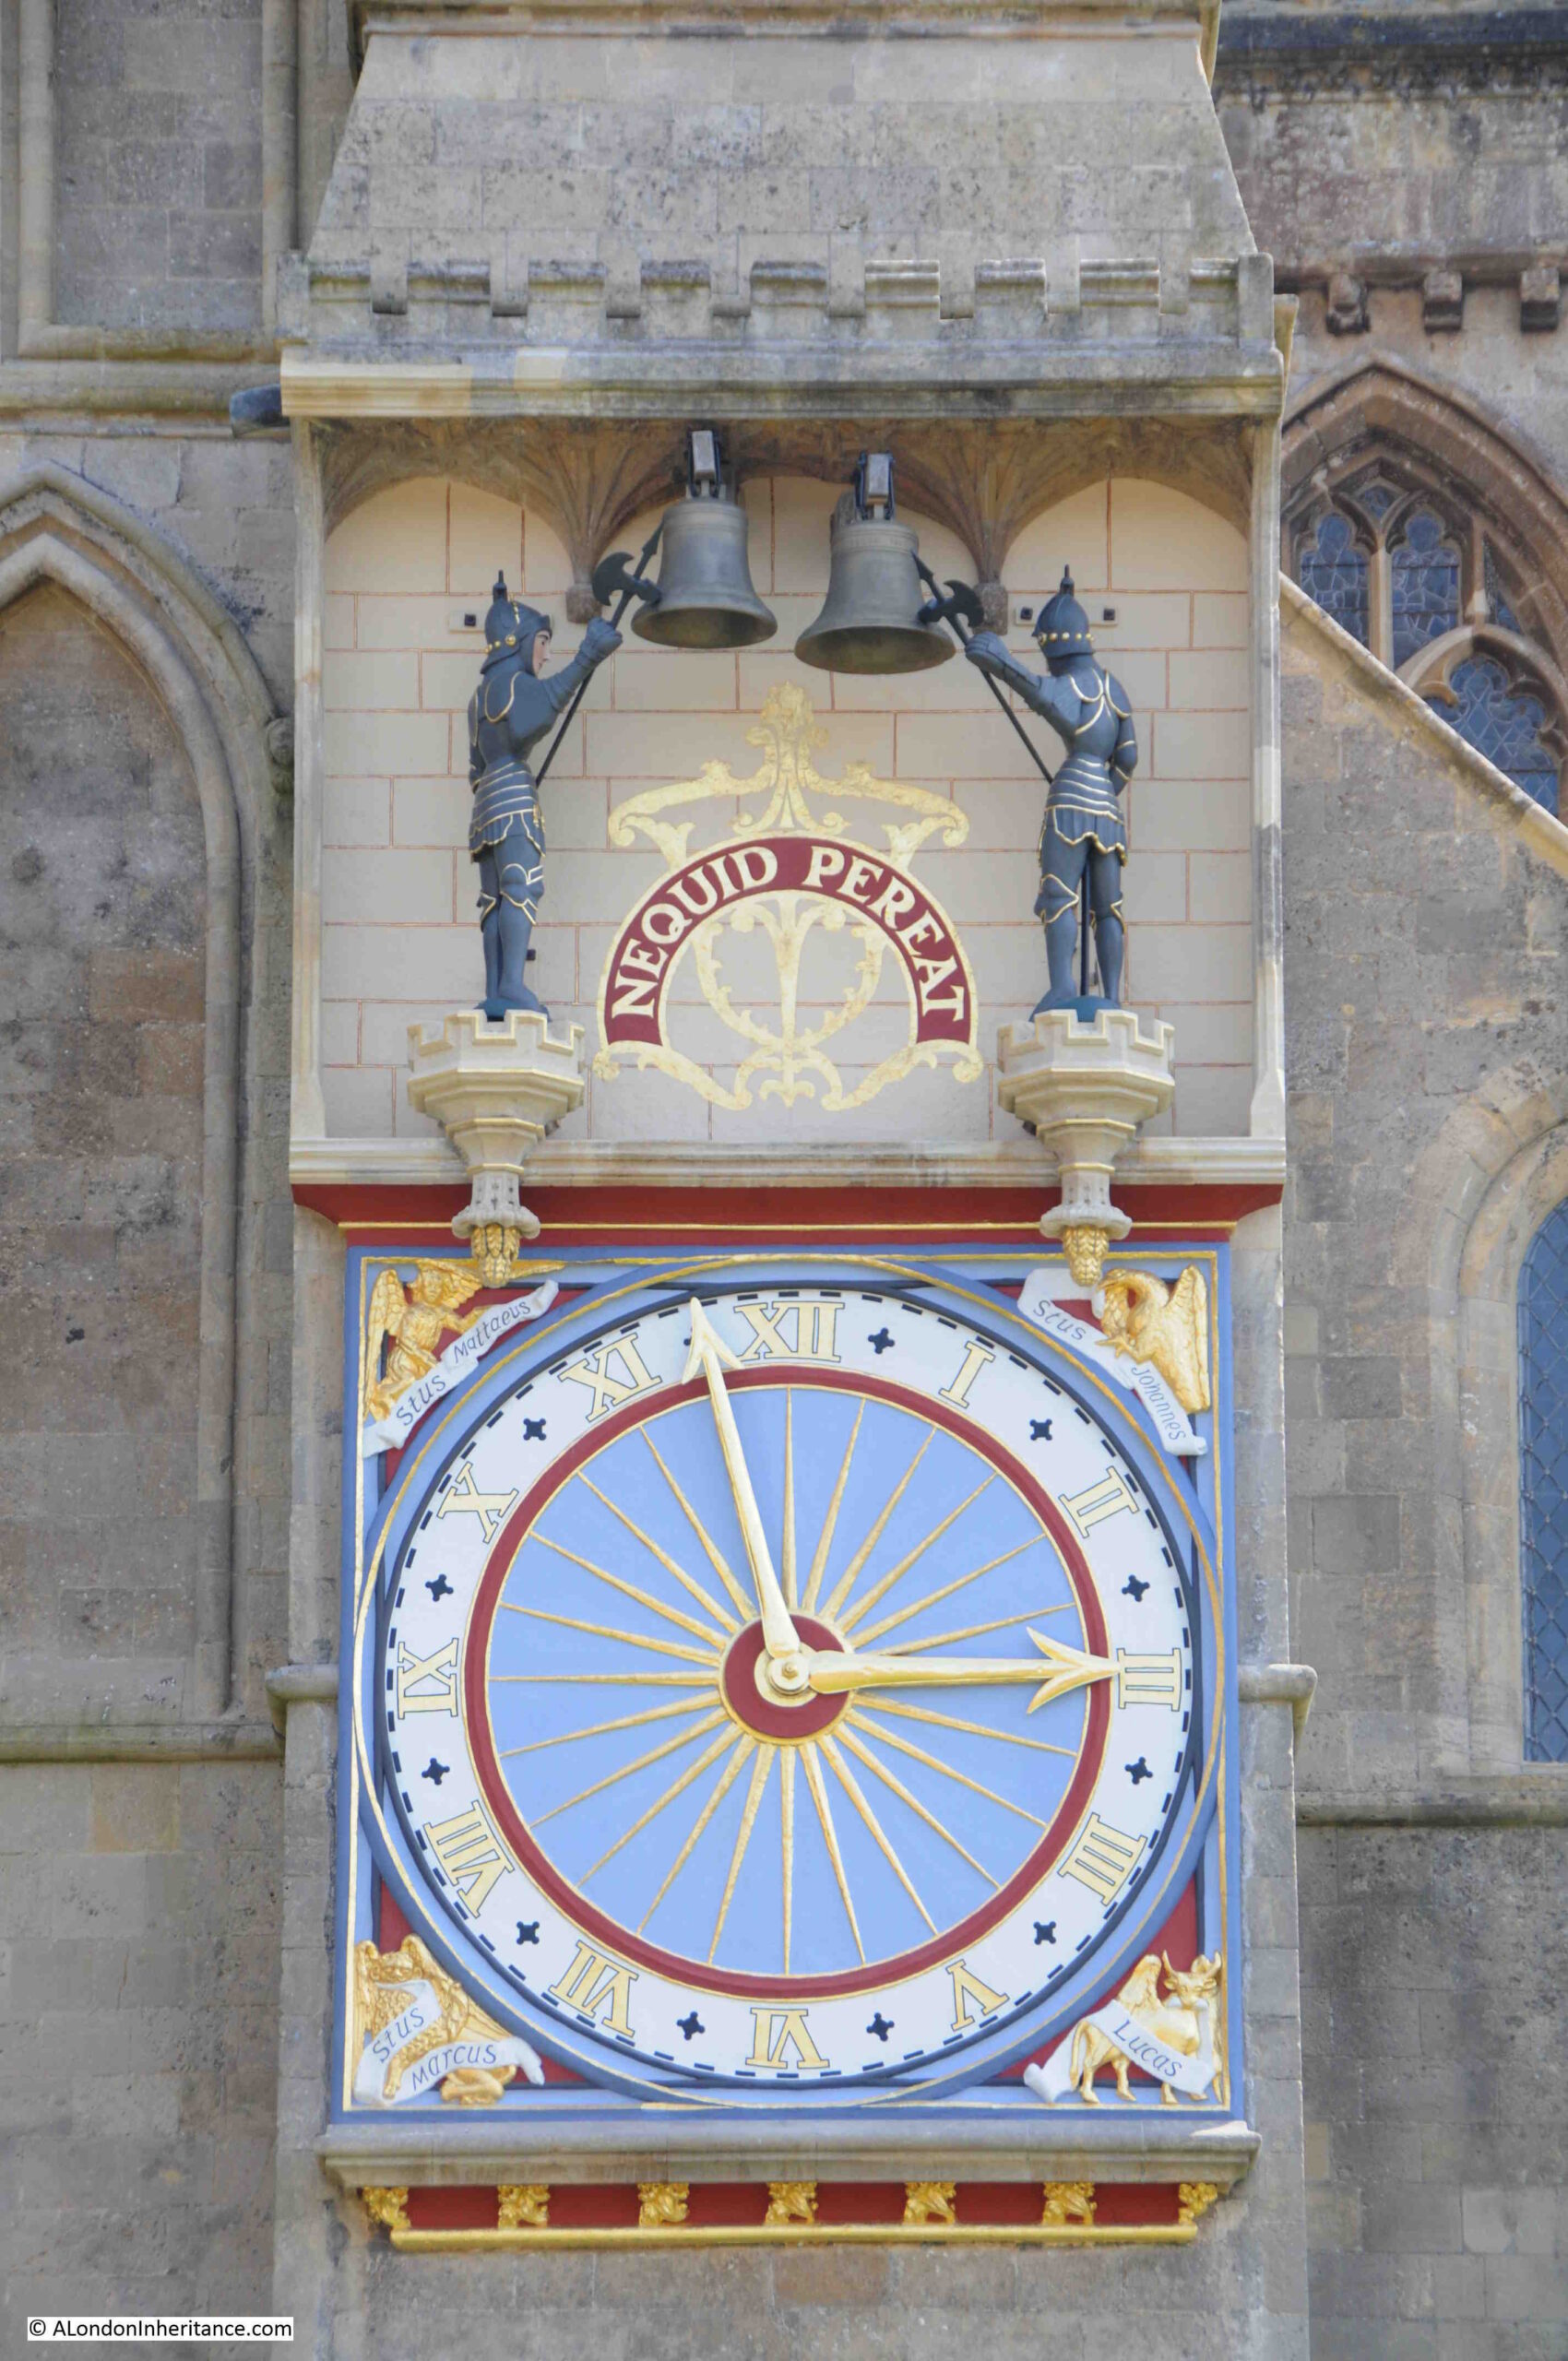 Cathedral Clock